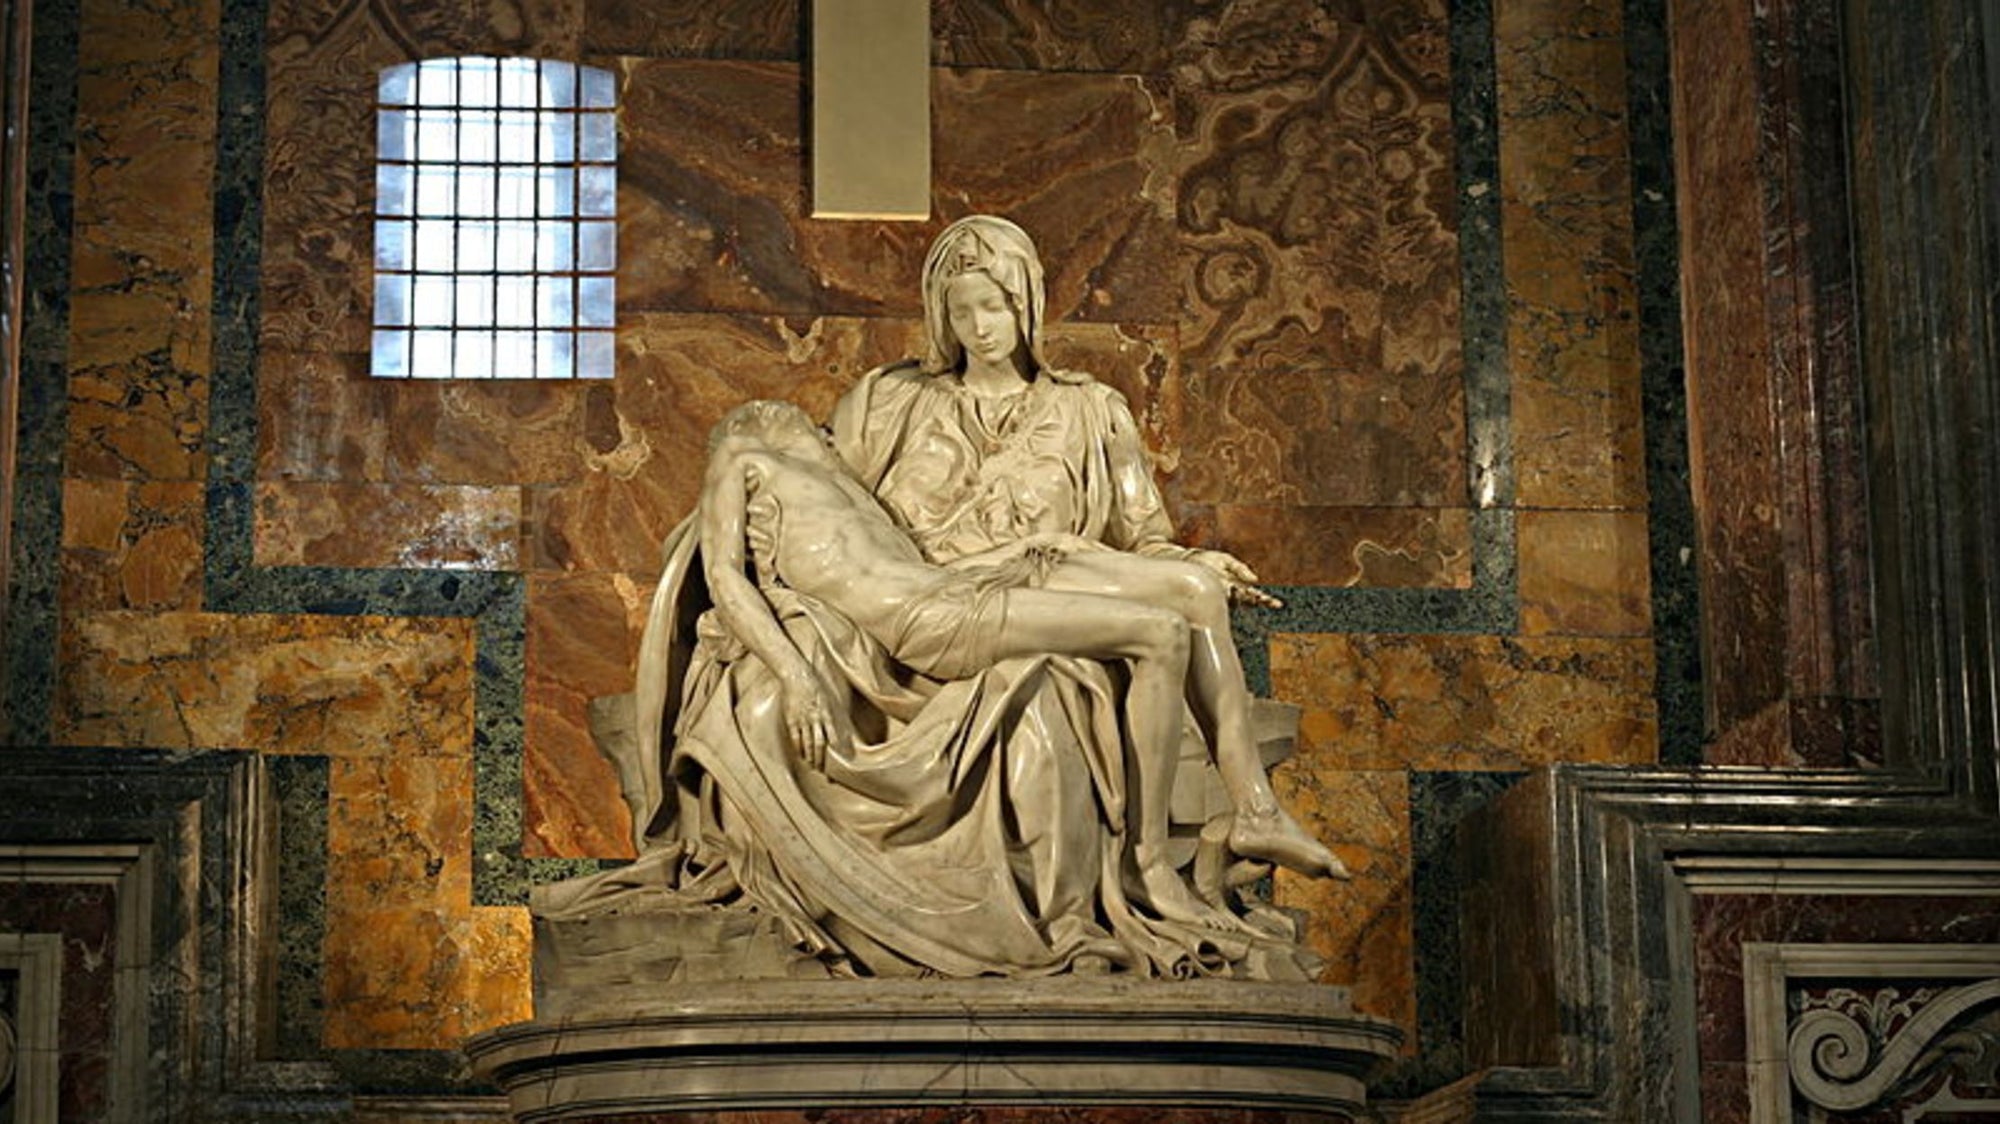 Bandini Pietà - A masterpiece imperfect and incomplete of Michelangelo